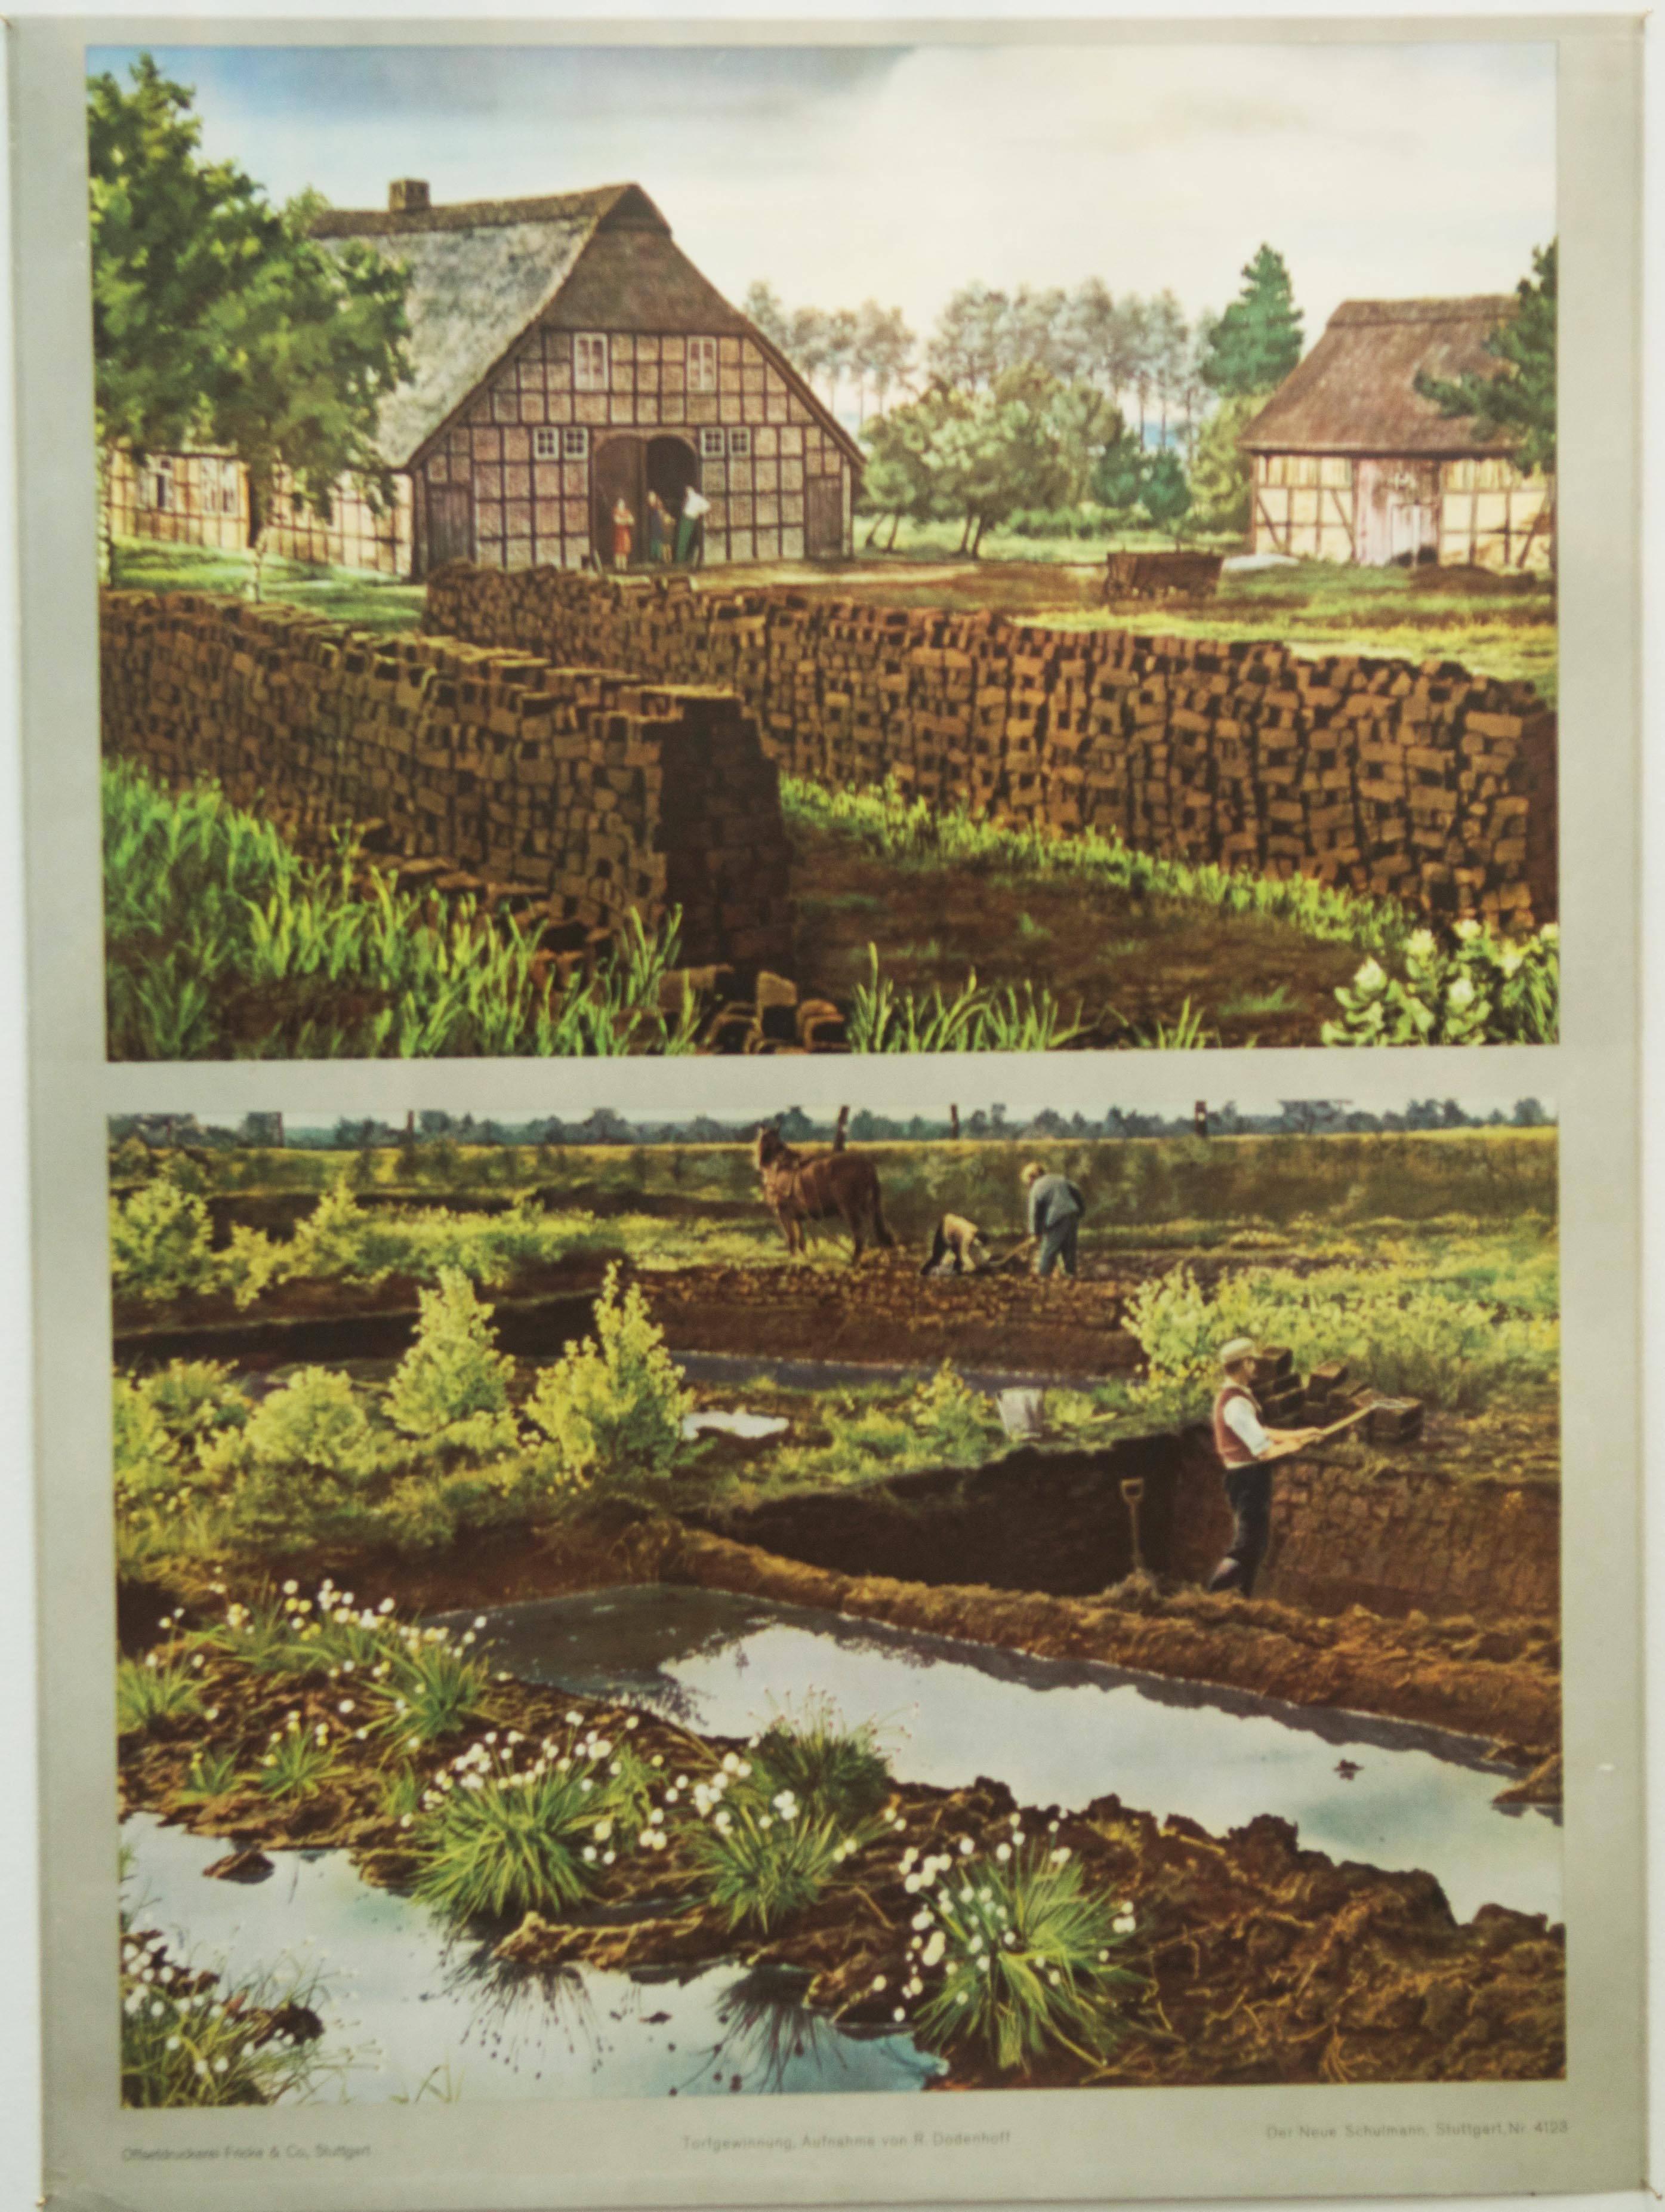 Vintage German school chart depicting the peat extraction.
Printed probably in the 1960s by 